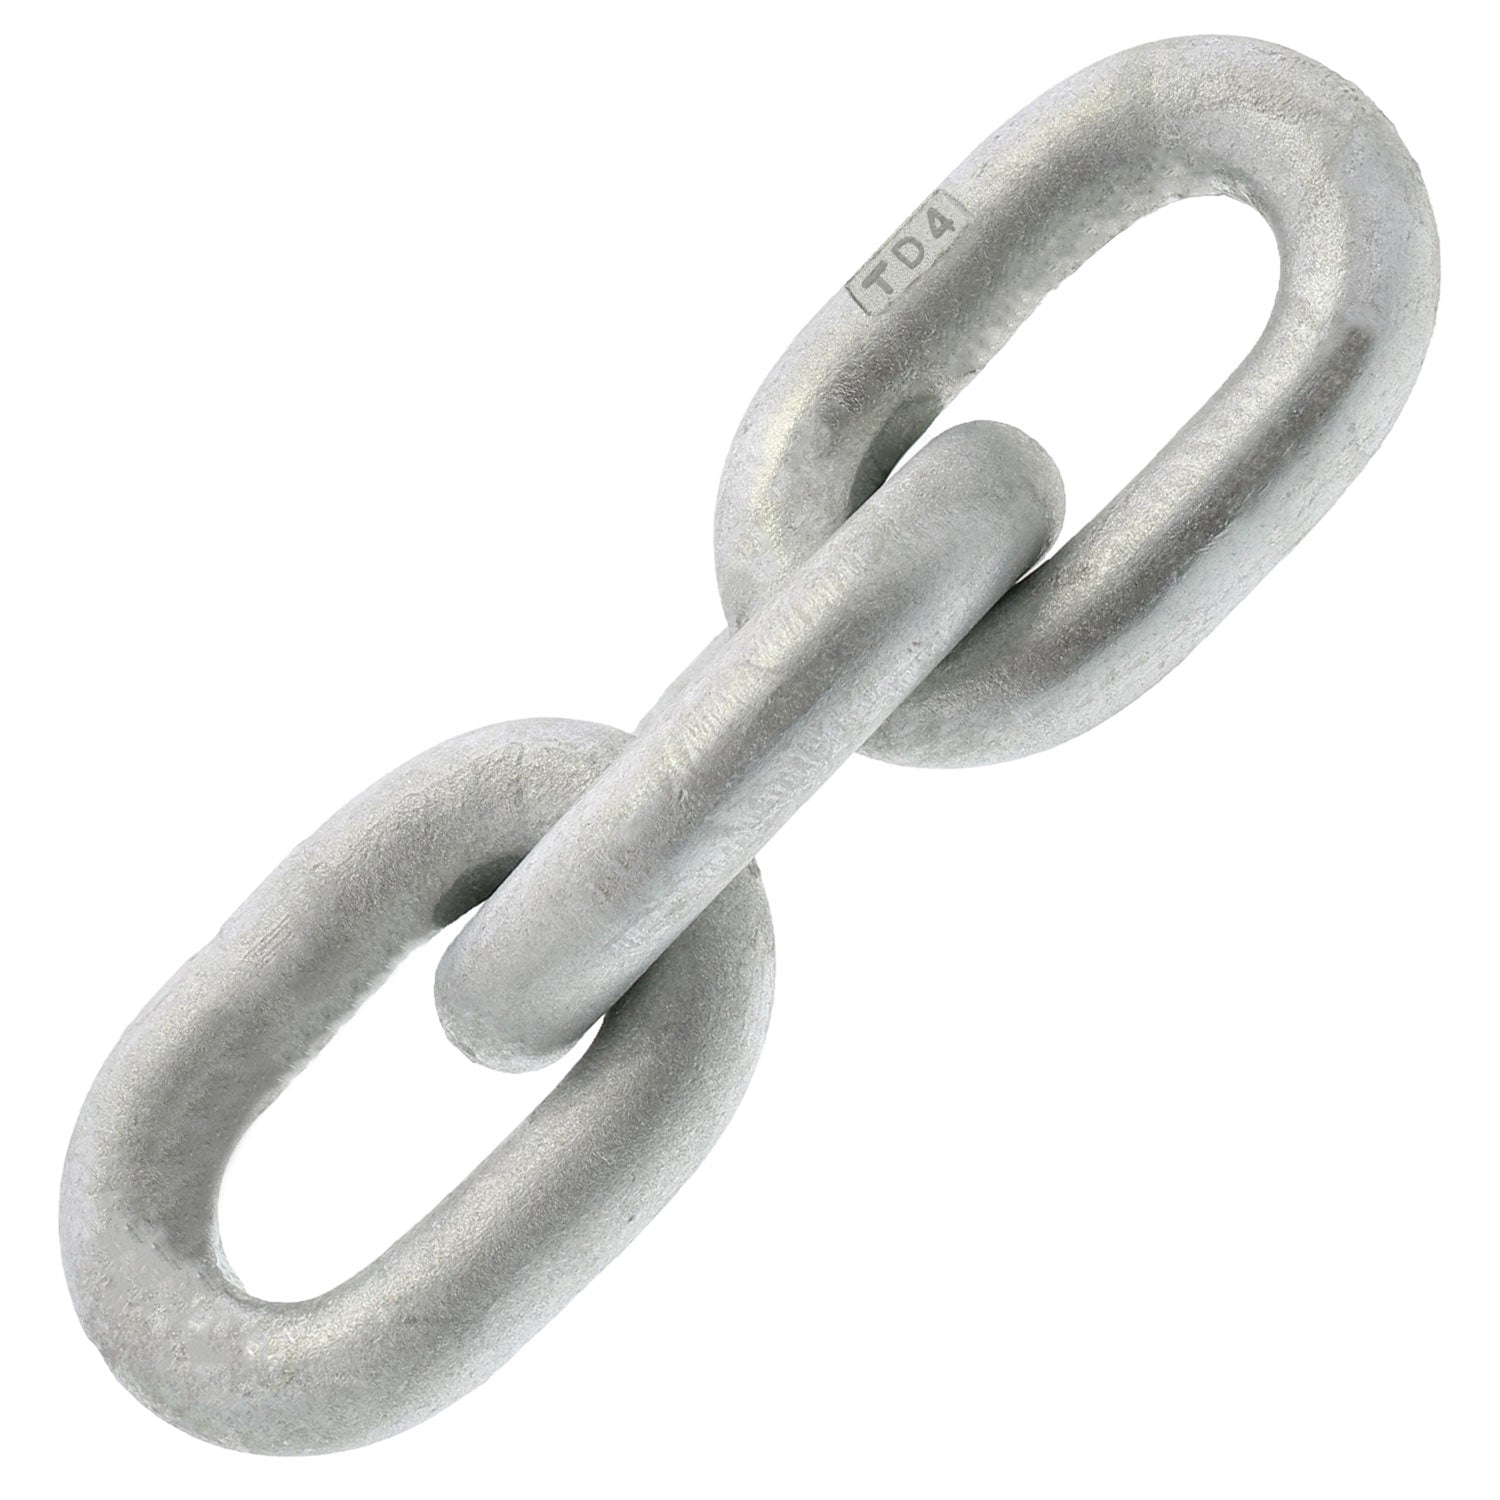 6mm Trident Marine DIN766, Hot Dipped Galvanized Chain (Sold Per Foot)